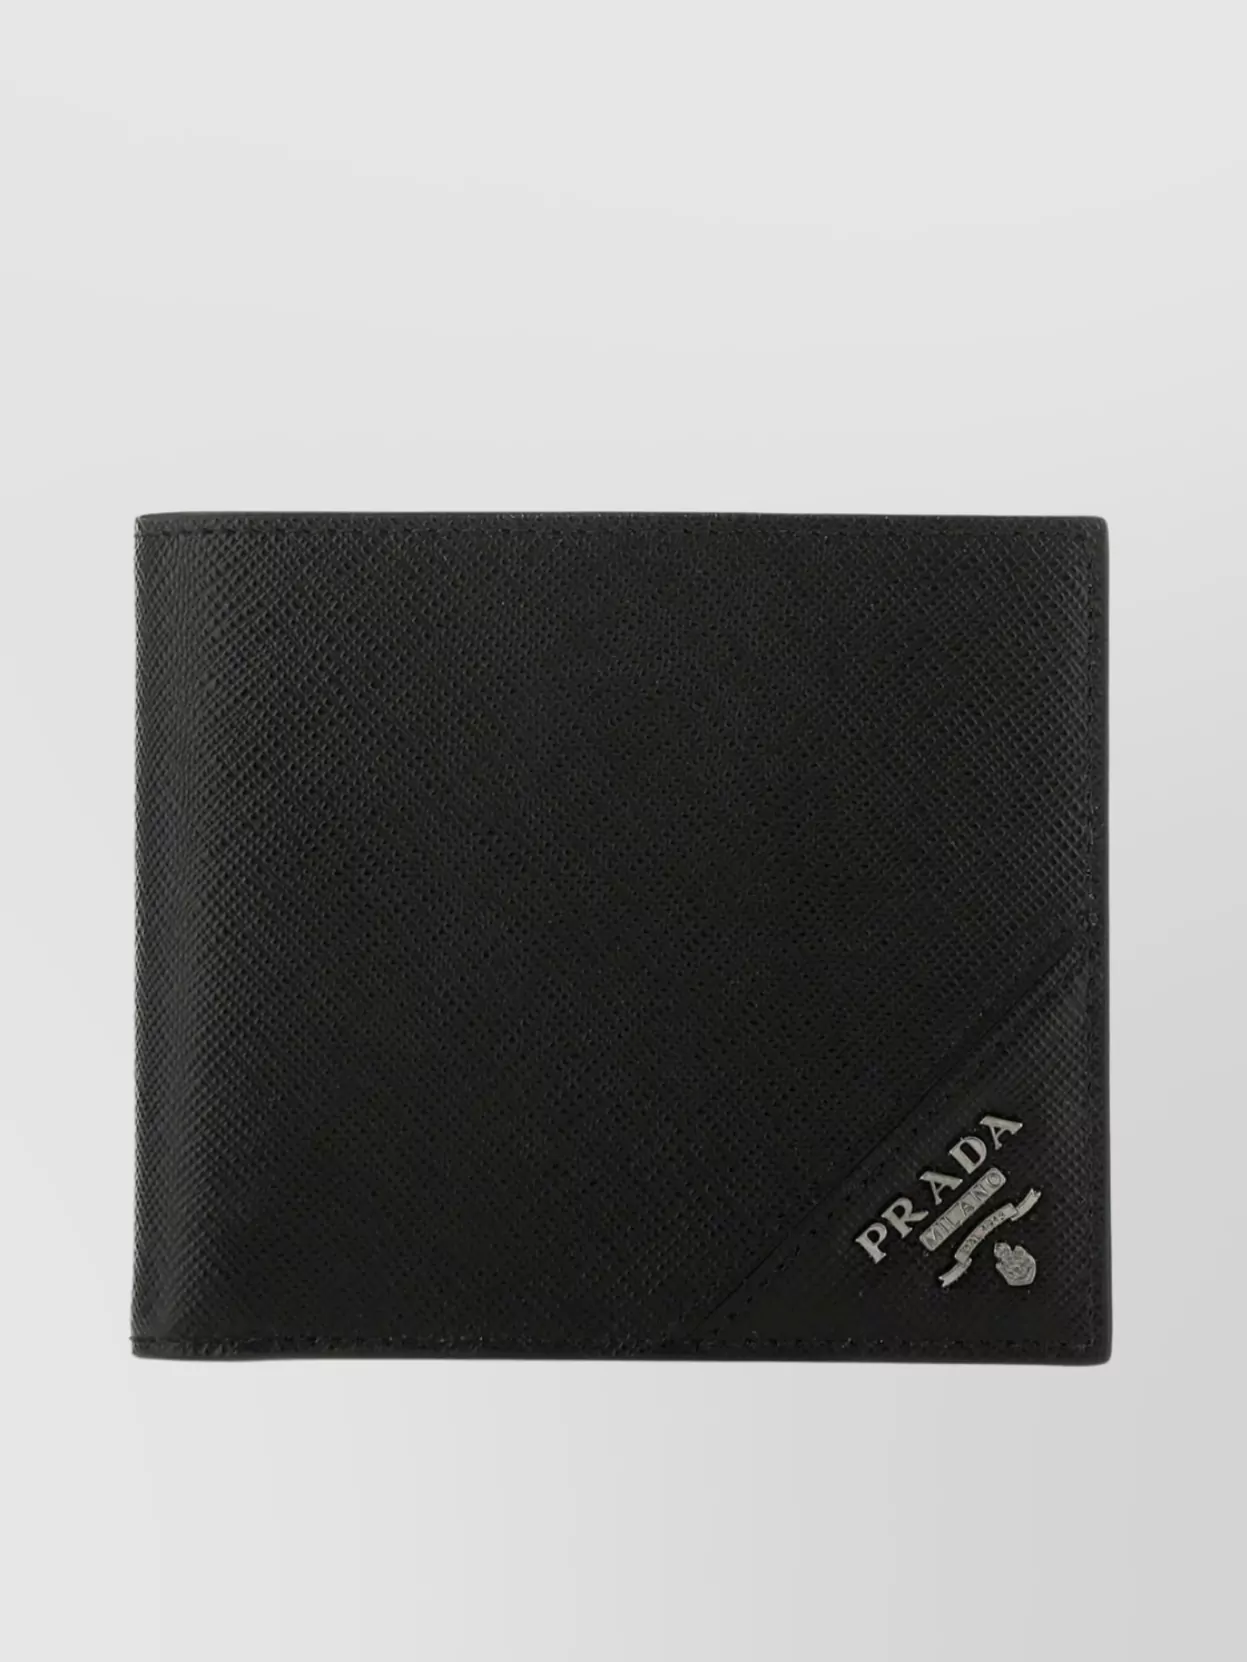 Shop Prada Leather Wallet With Bi-fold Design And Textured Finish